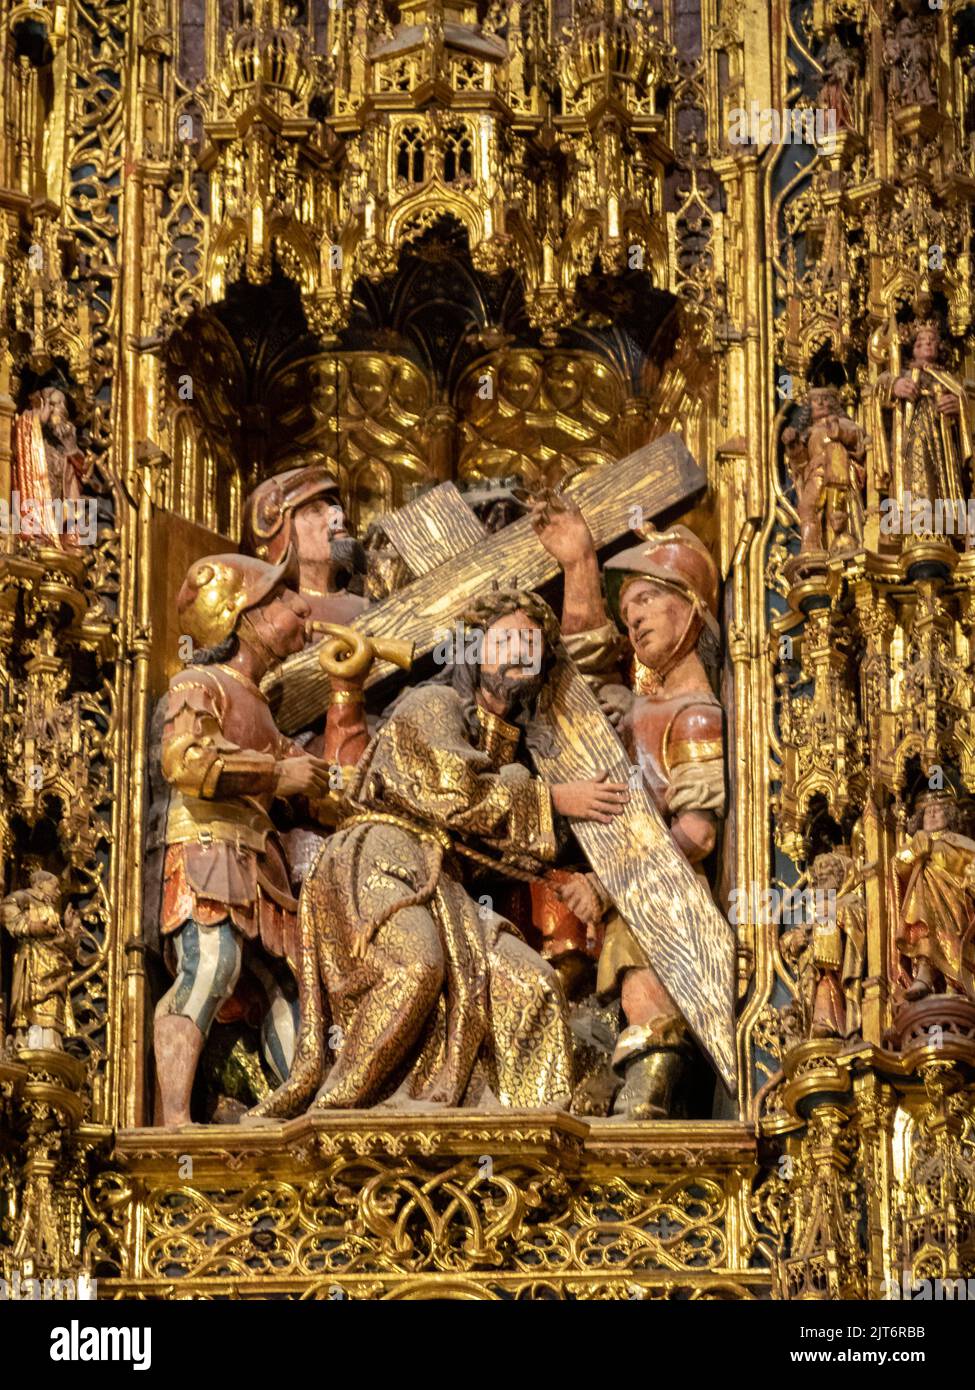 Christ carrying the cross depicted in the altarpiece of Seville Cathedral Main Chapel Stock Photo